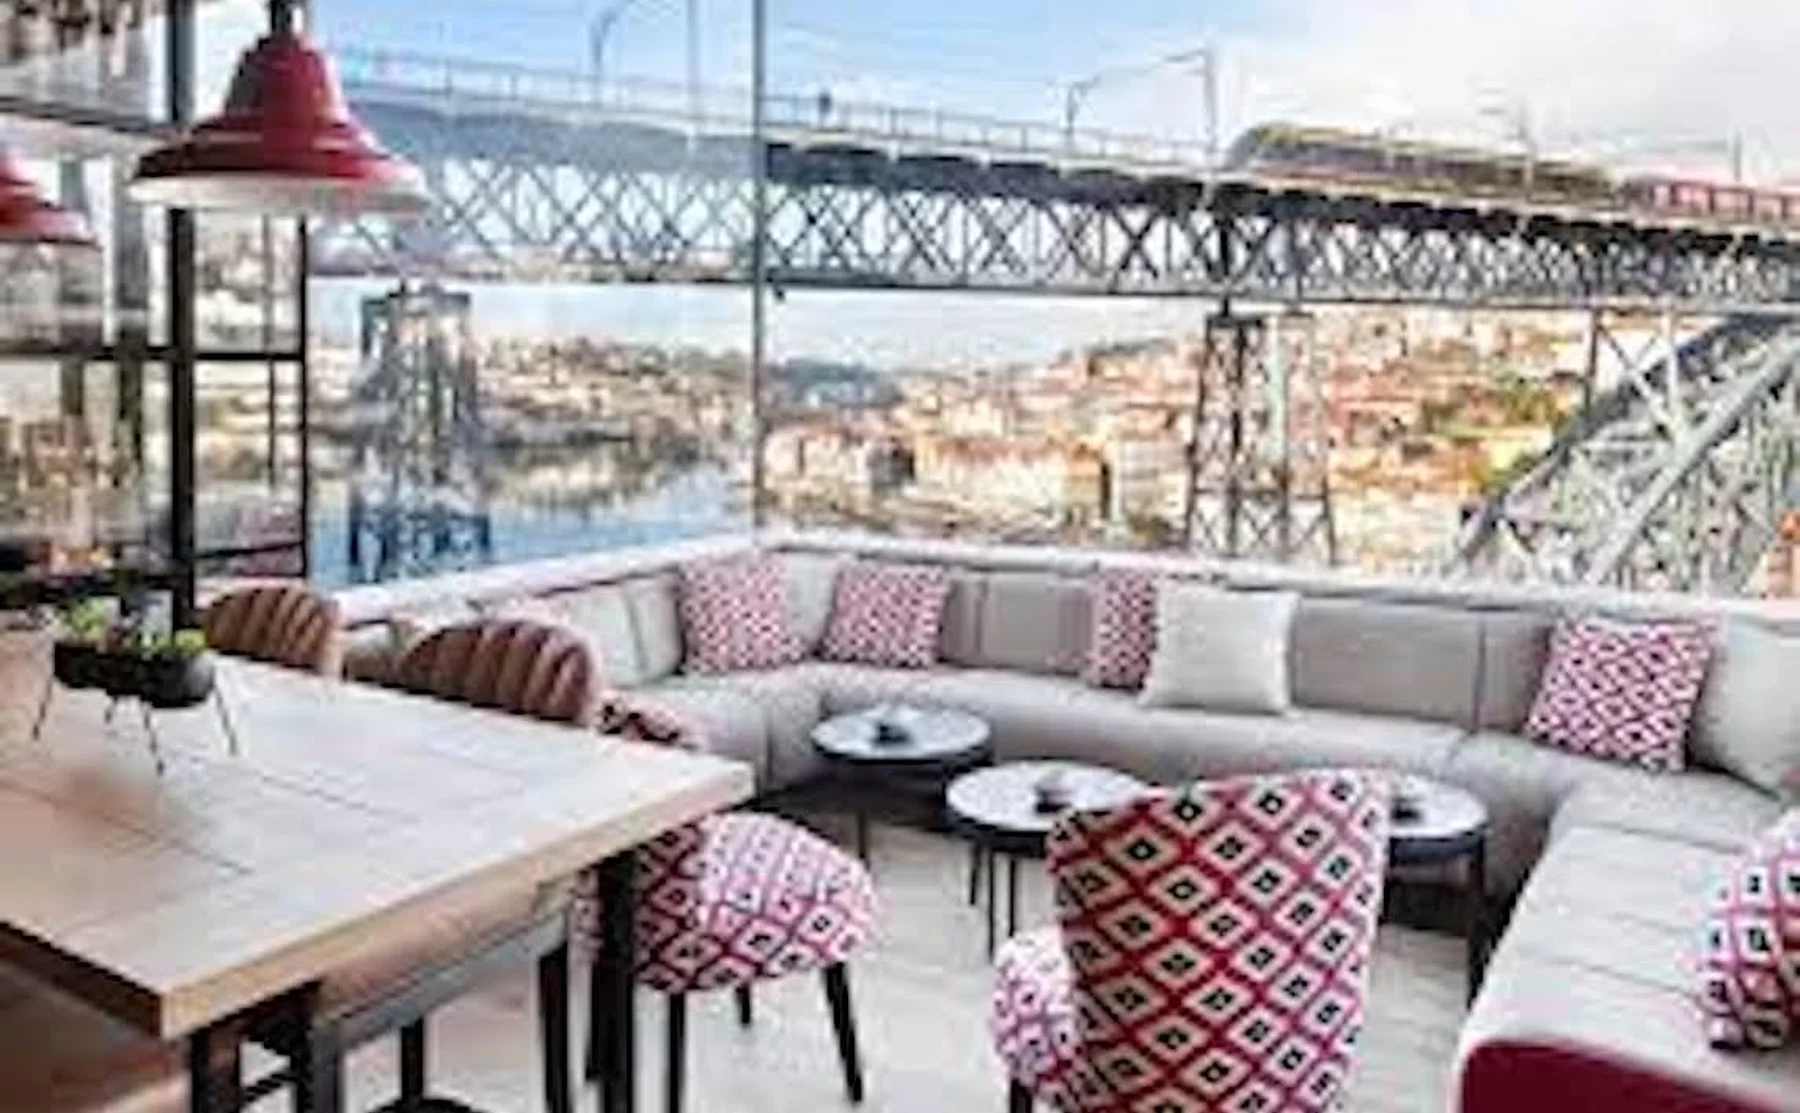 Watch the Porto sunset and drink wine overlooking the Luís I Bridge - 1478498